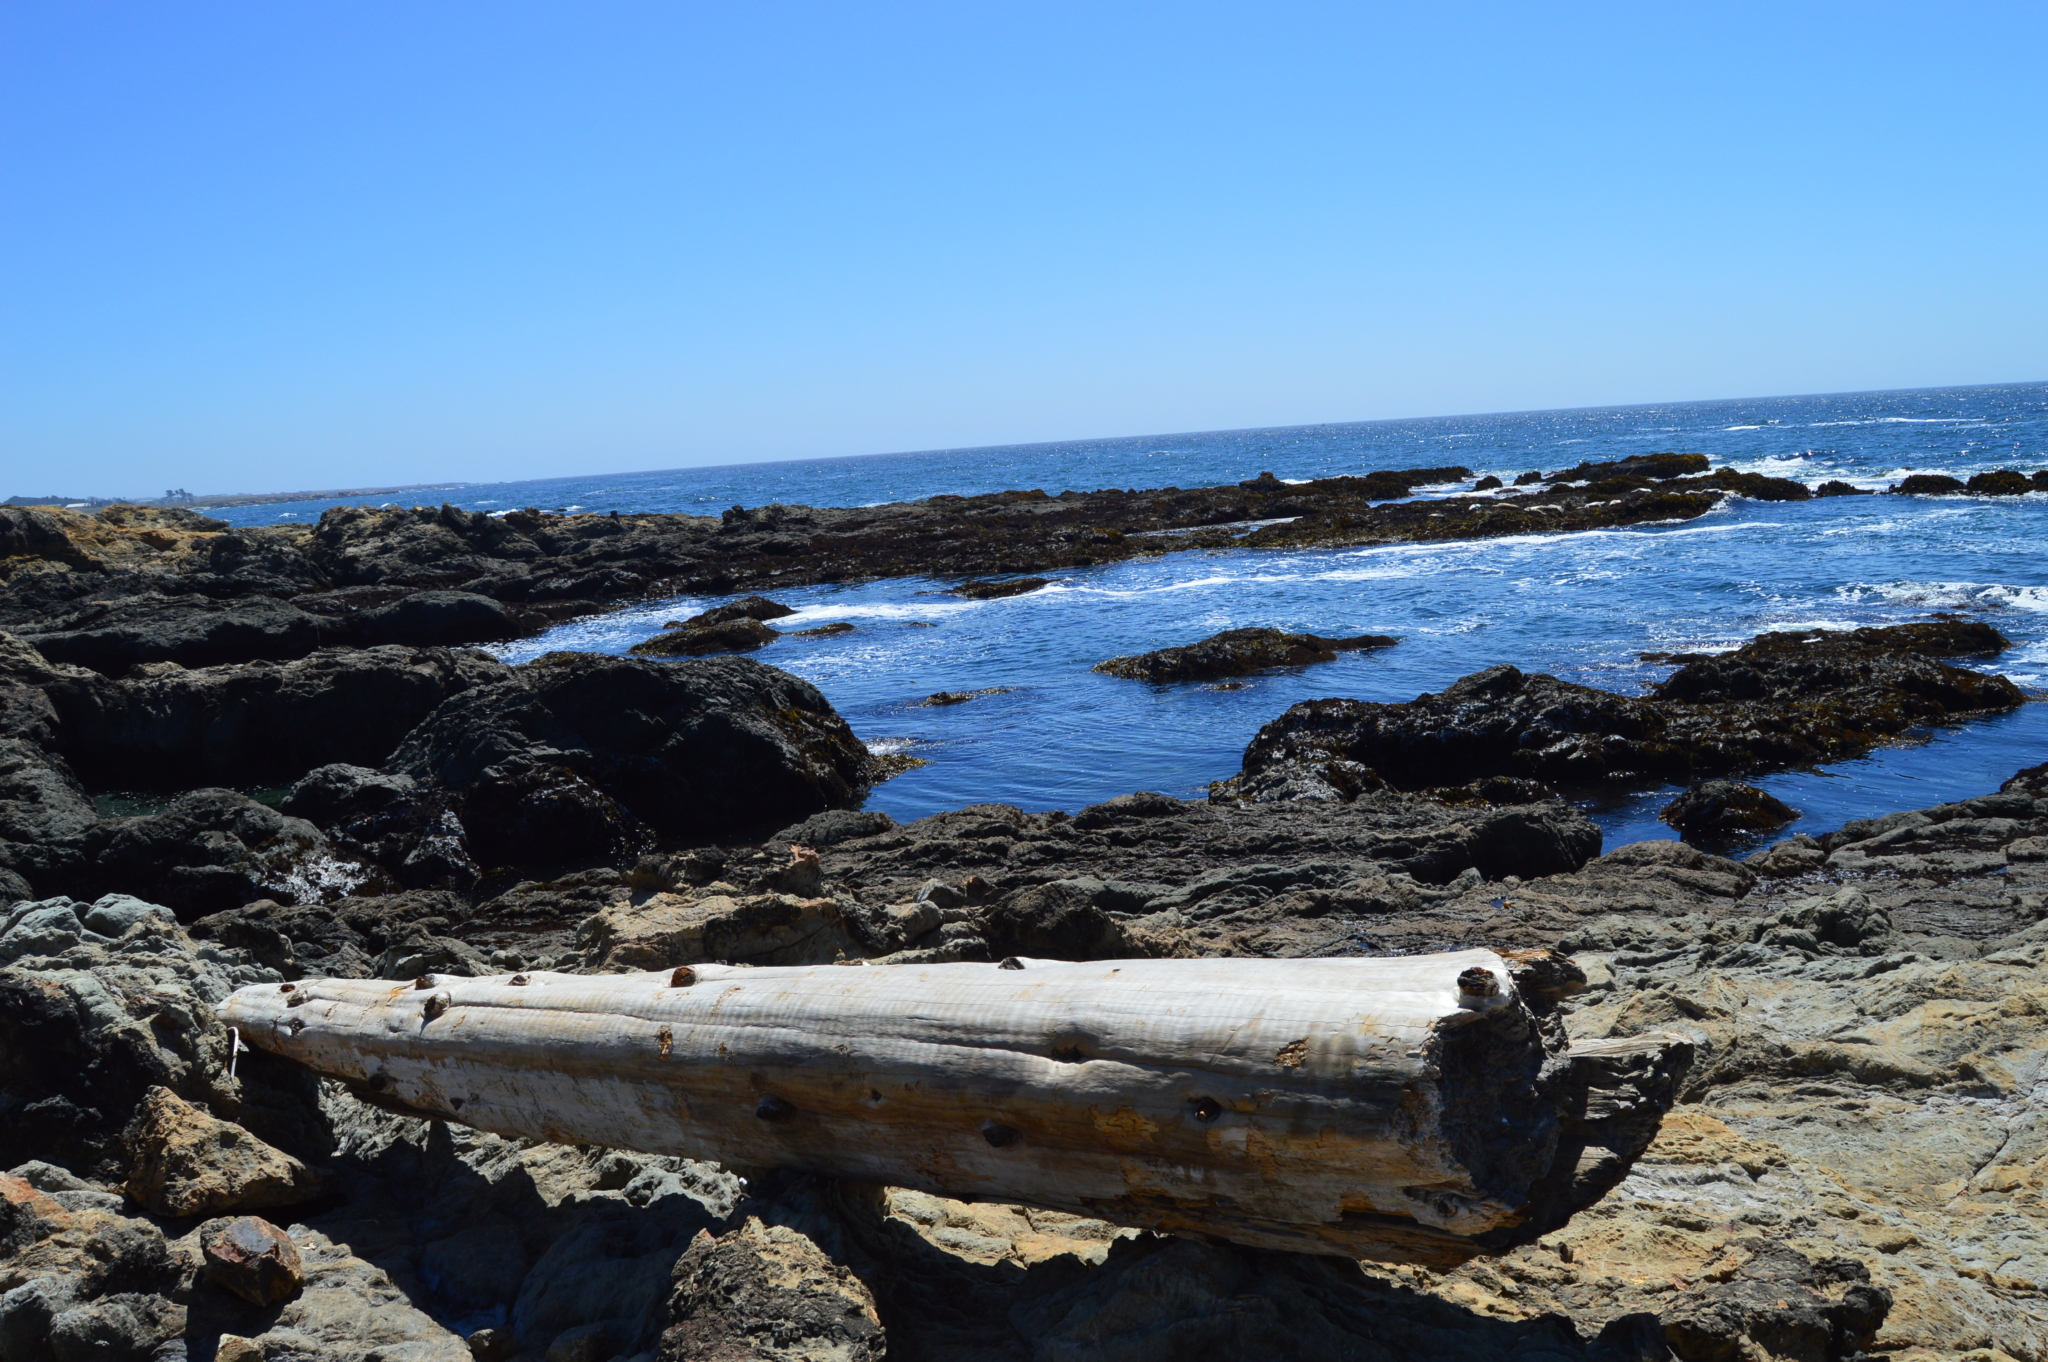 Wooden log laying on rocky ocean shore in Northern California